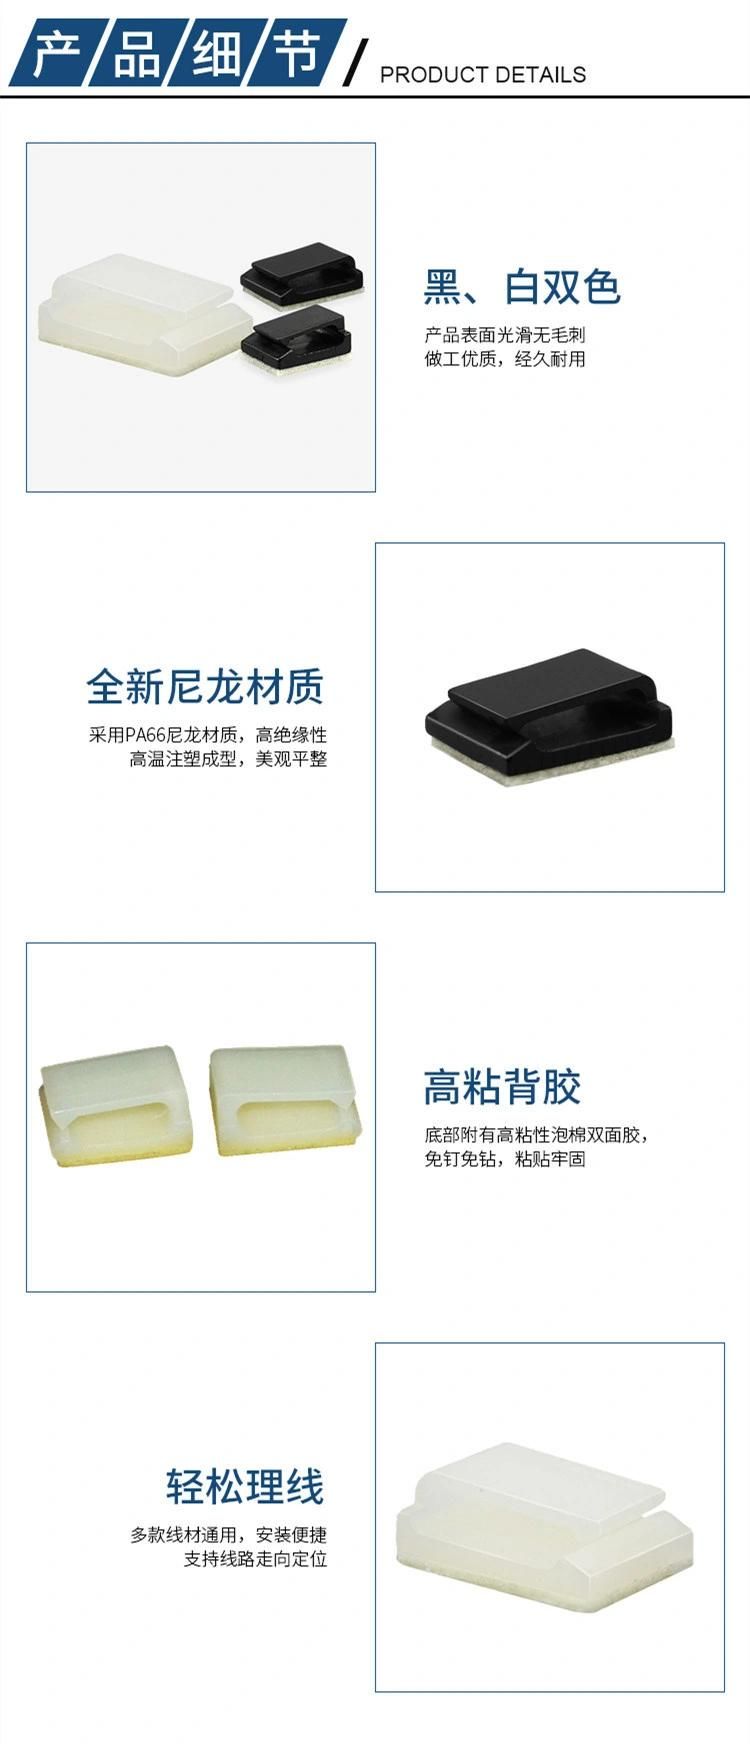 Plastic Cable Fasten Saddle Computer Case Flat Cable, Heyingcn Self Adhesive PCB Clamp Seat Nylon Cable Mount